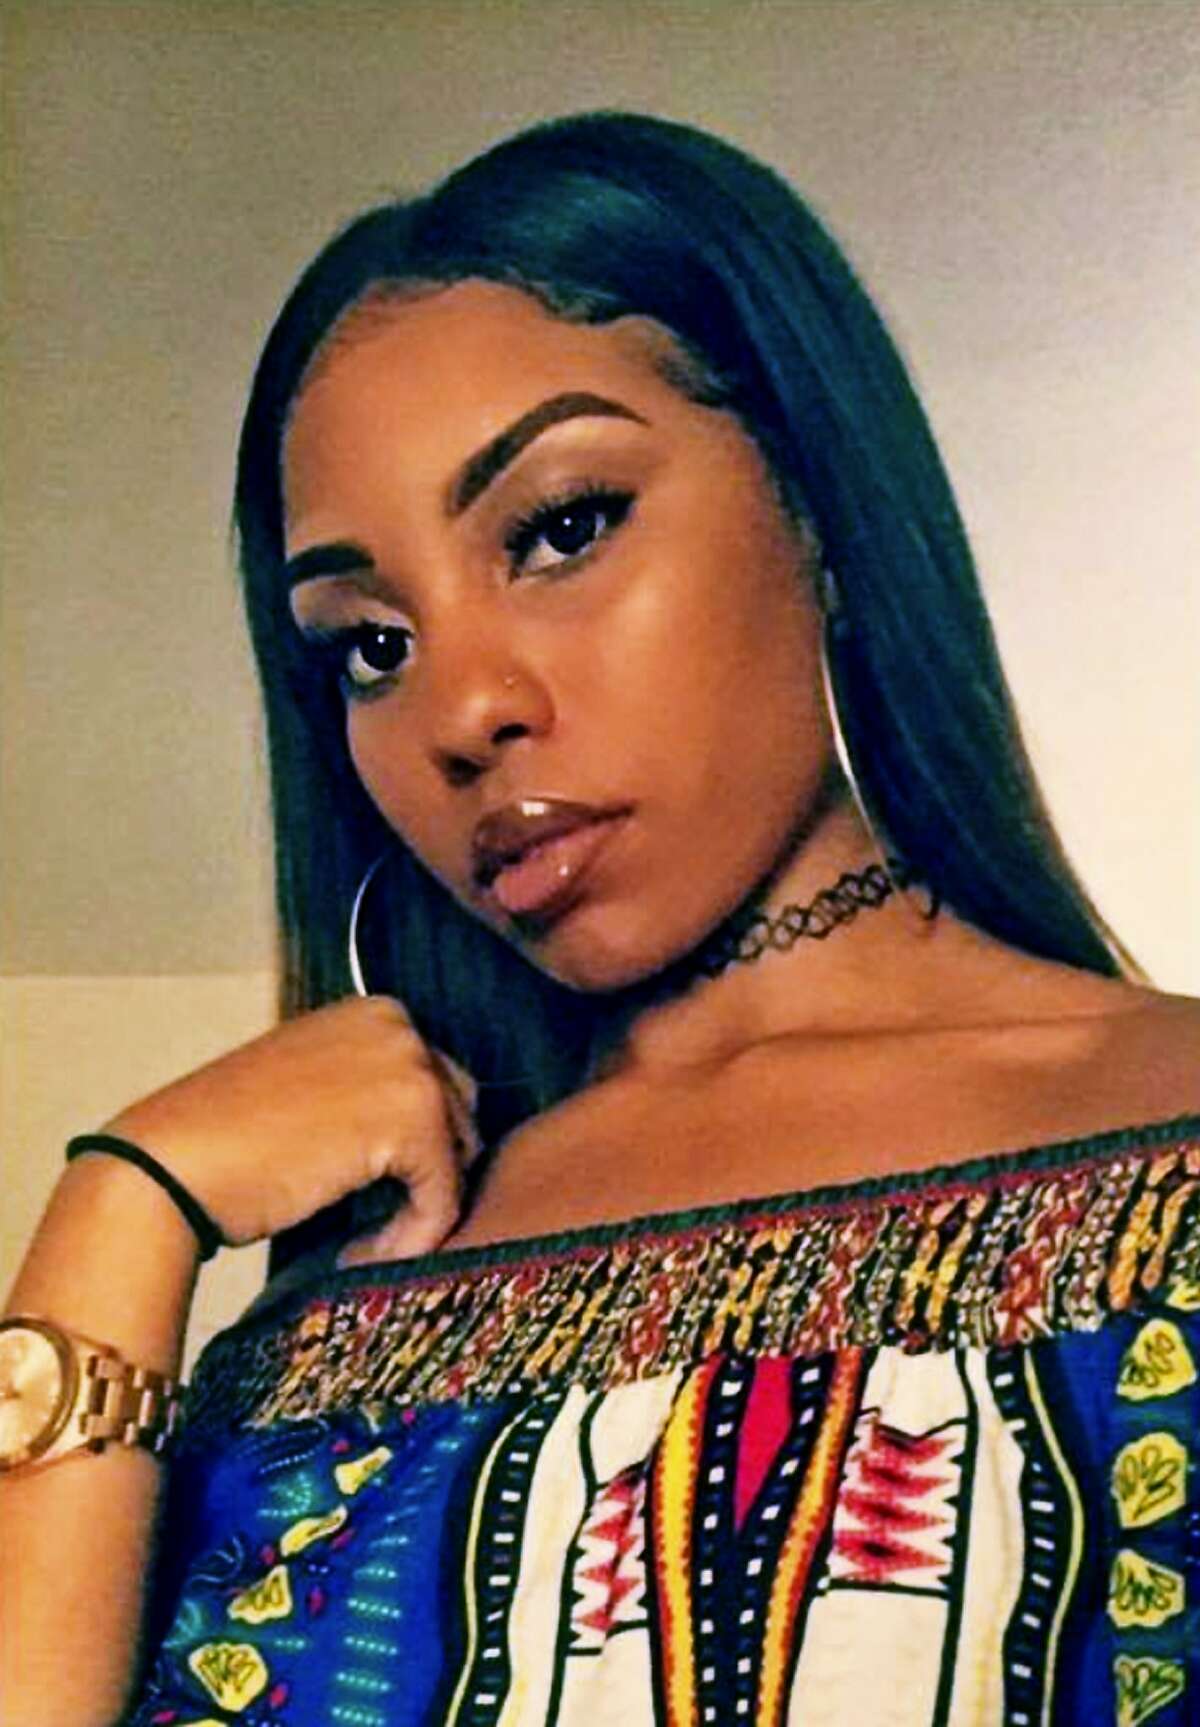 This July 3, 2017, photo provided by Ebony Monroe shows her cousin Nia Wilson in a selfie, who was killed in an unprovoked stabbing attack at a Bay Area Rapid Transit station in Oakland, Calif., Sunday, July 22, 2018. John Cowell, 27, a recently paroled robber with a violent history, was peacefully arrested on an Antioch-bound train Monday night about 12 miles (19 kilometers) from the Oakland station where investigators believe he killed Wilson and wounded her sister Sunday night.